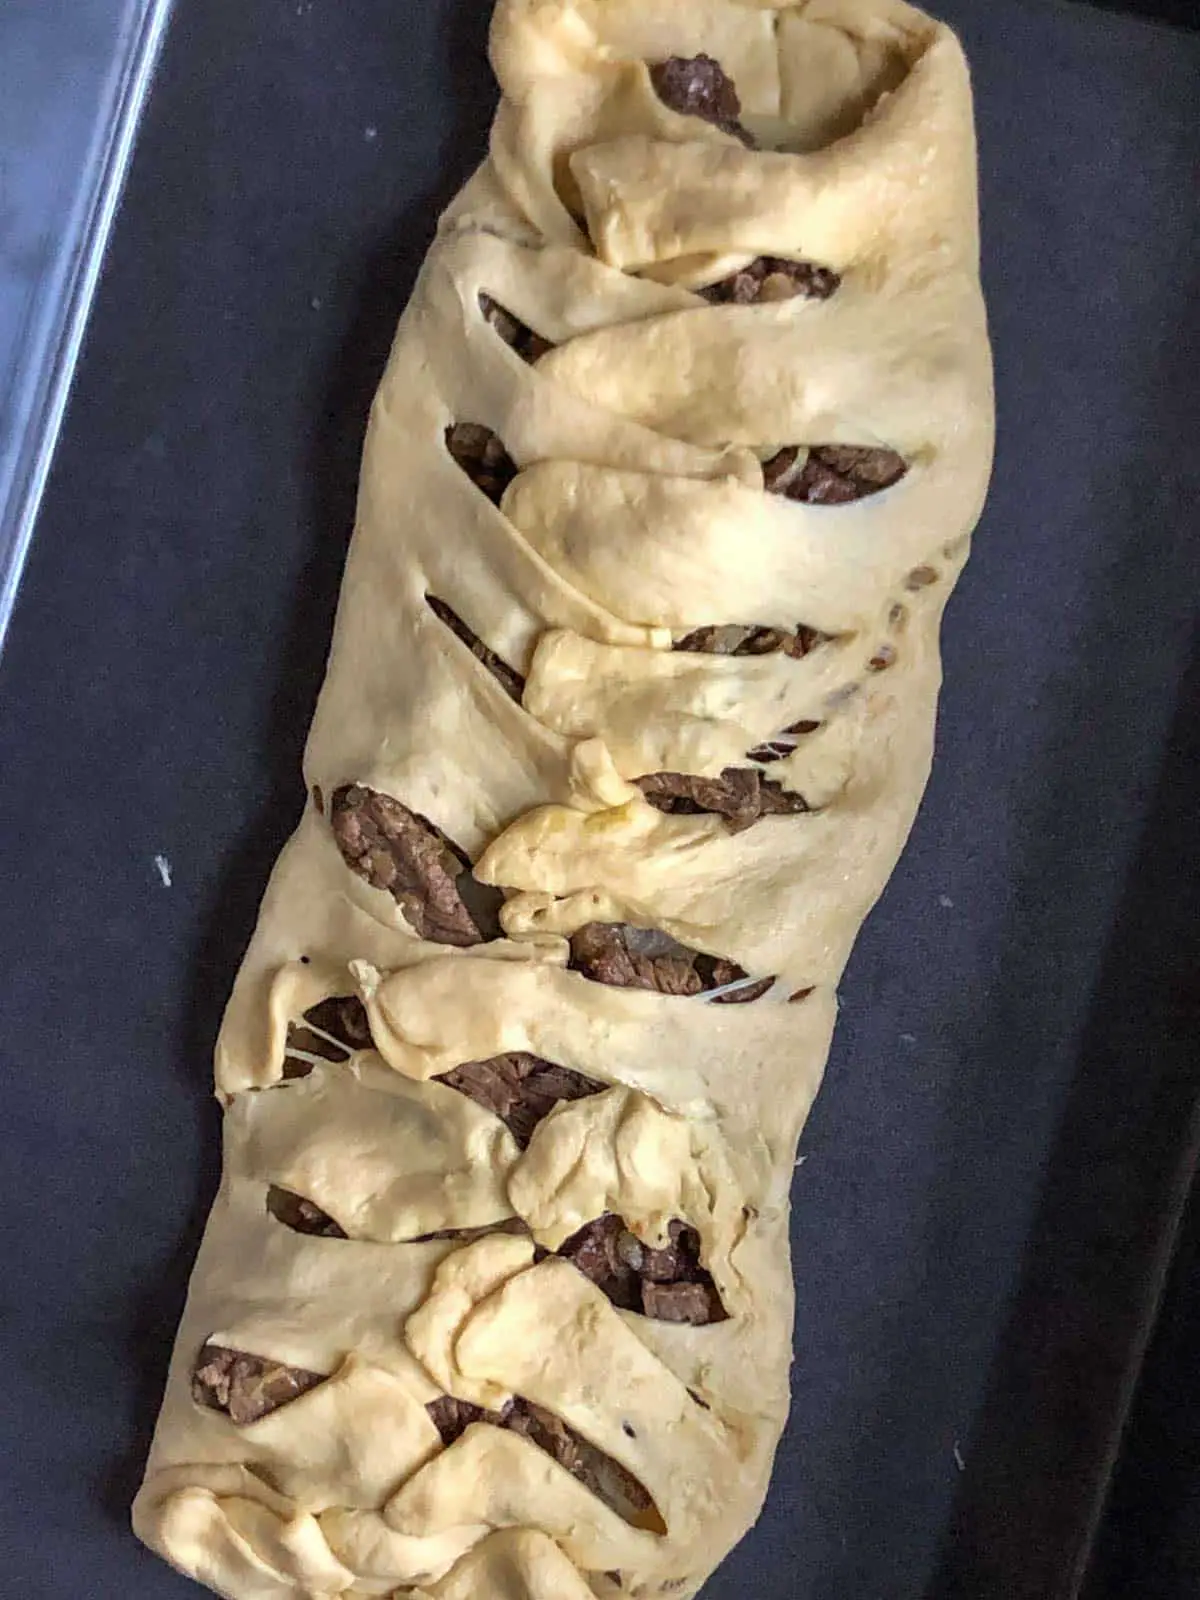 Sliced rib eye steak wrapped with crescent roll dough that has been cut into 1 inch intervals and placed on top of the sliced meat to resemble mummy wrappings.